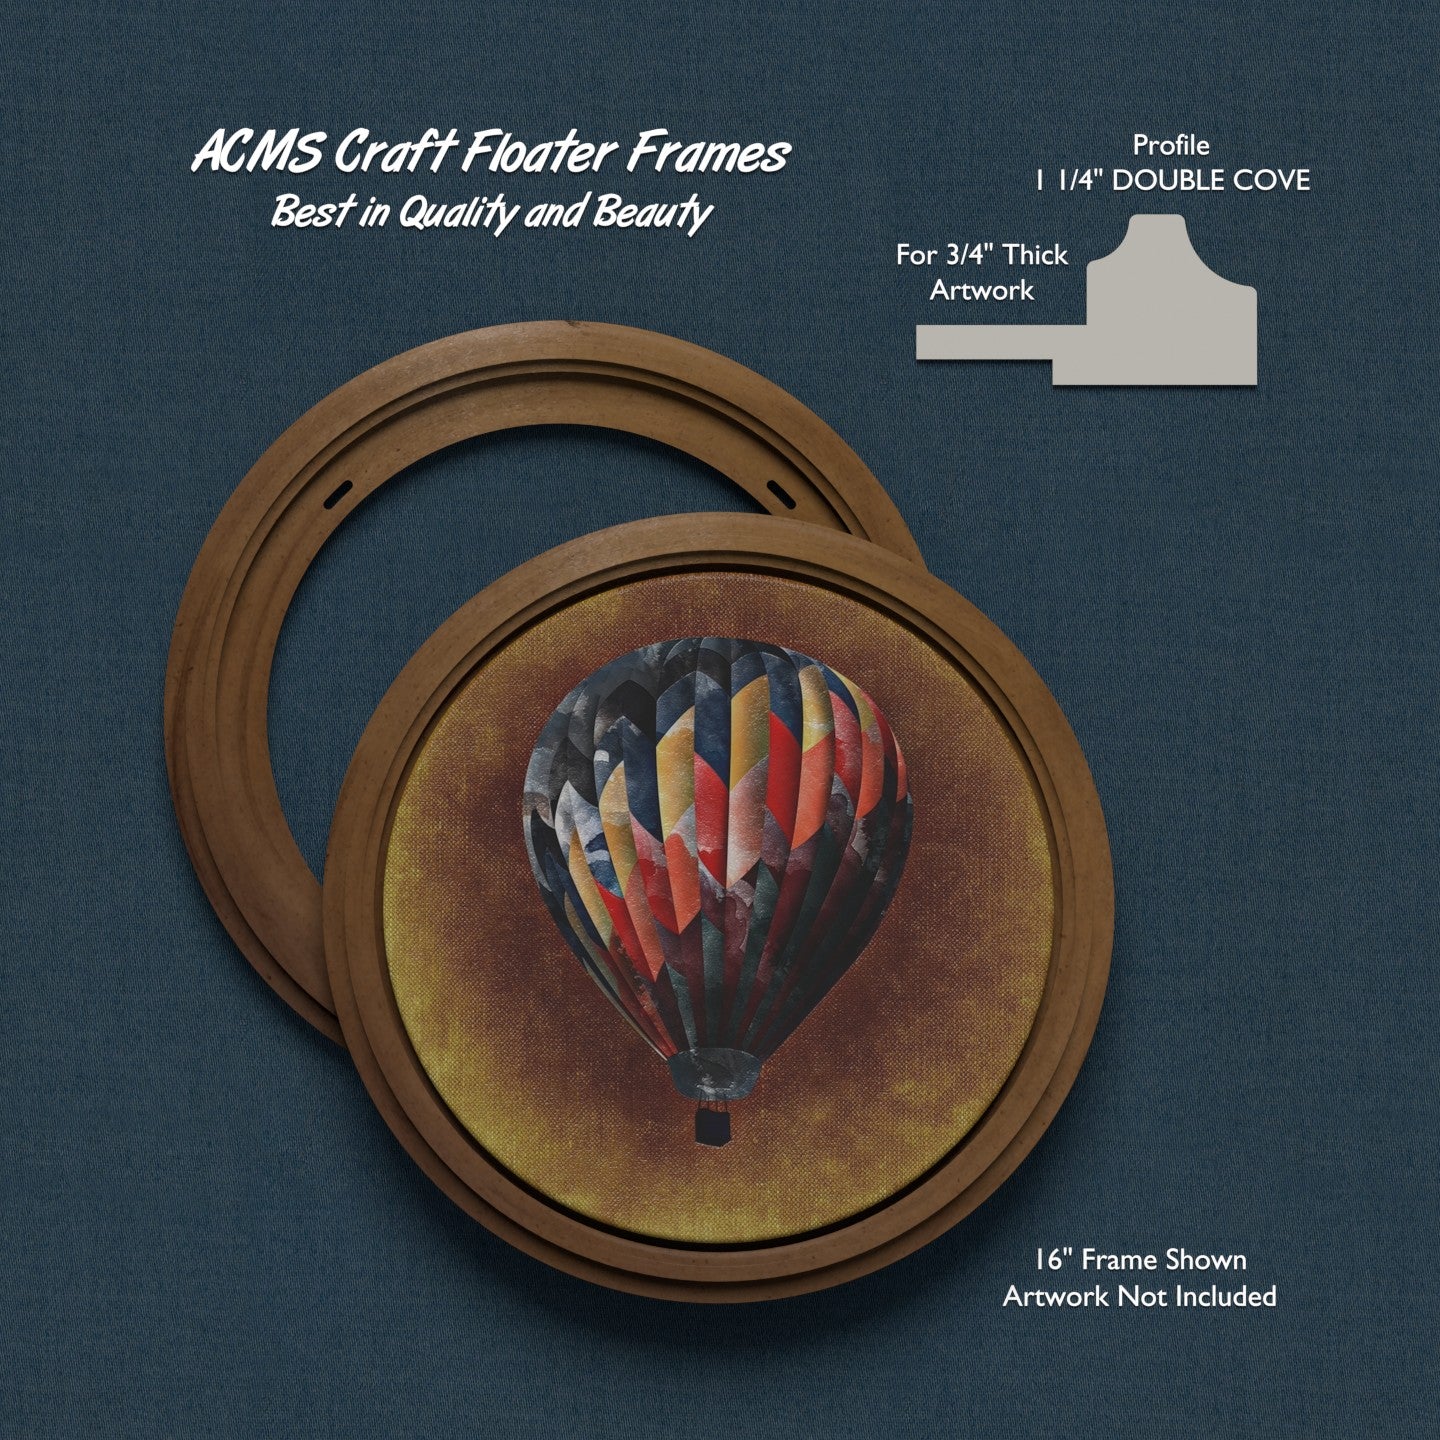 ACMS Round Craft Floater Frame - For 3/4" Thick Artwork - Profile 1 1/4" DOUBLE COVE - 1 1/4" Thick Frame